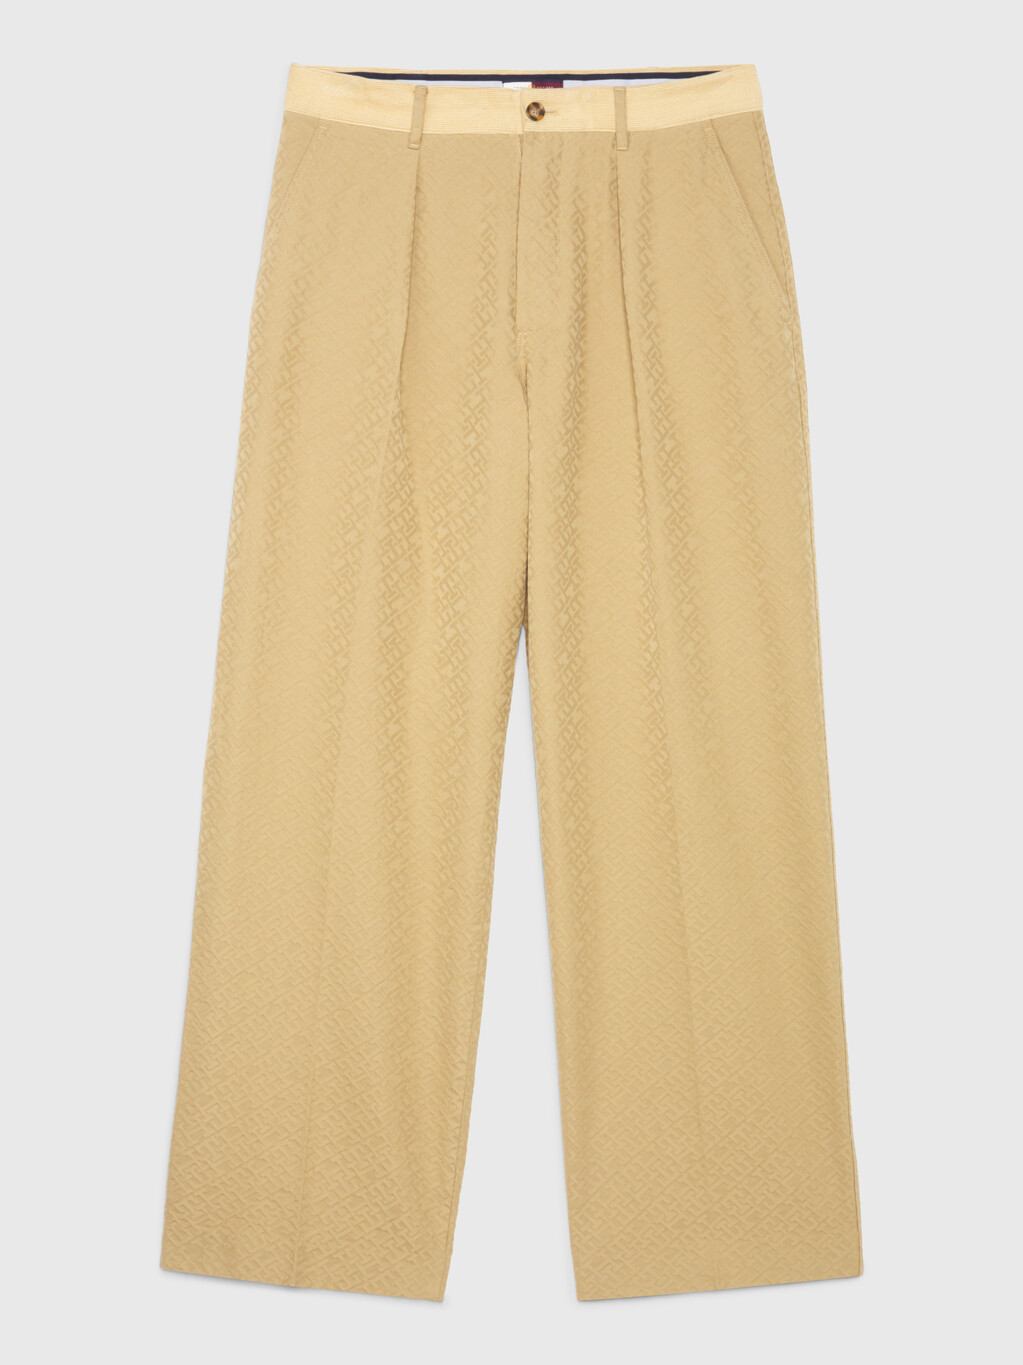 Crest Th Monogram Relaxed Fit Chinos, Sandy Beige, hi-res